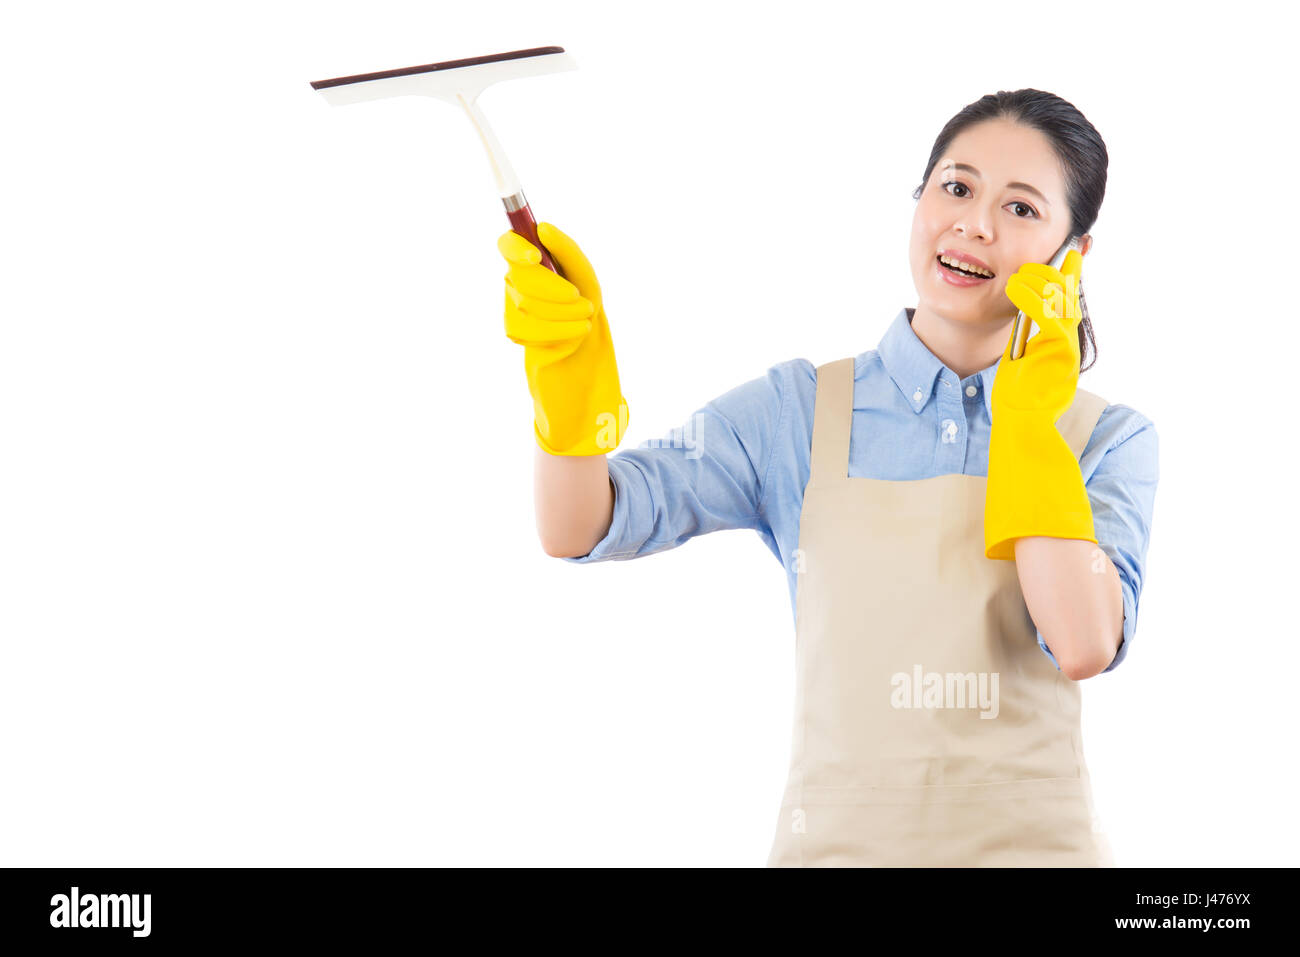 beautiful girl wipe glass by holding a wiper and call for professional house cleaning services. isolated on white background. mixed race asian chinese Stock Photo